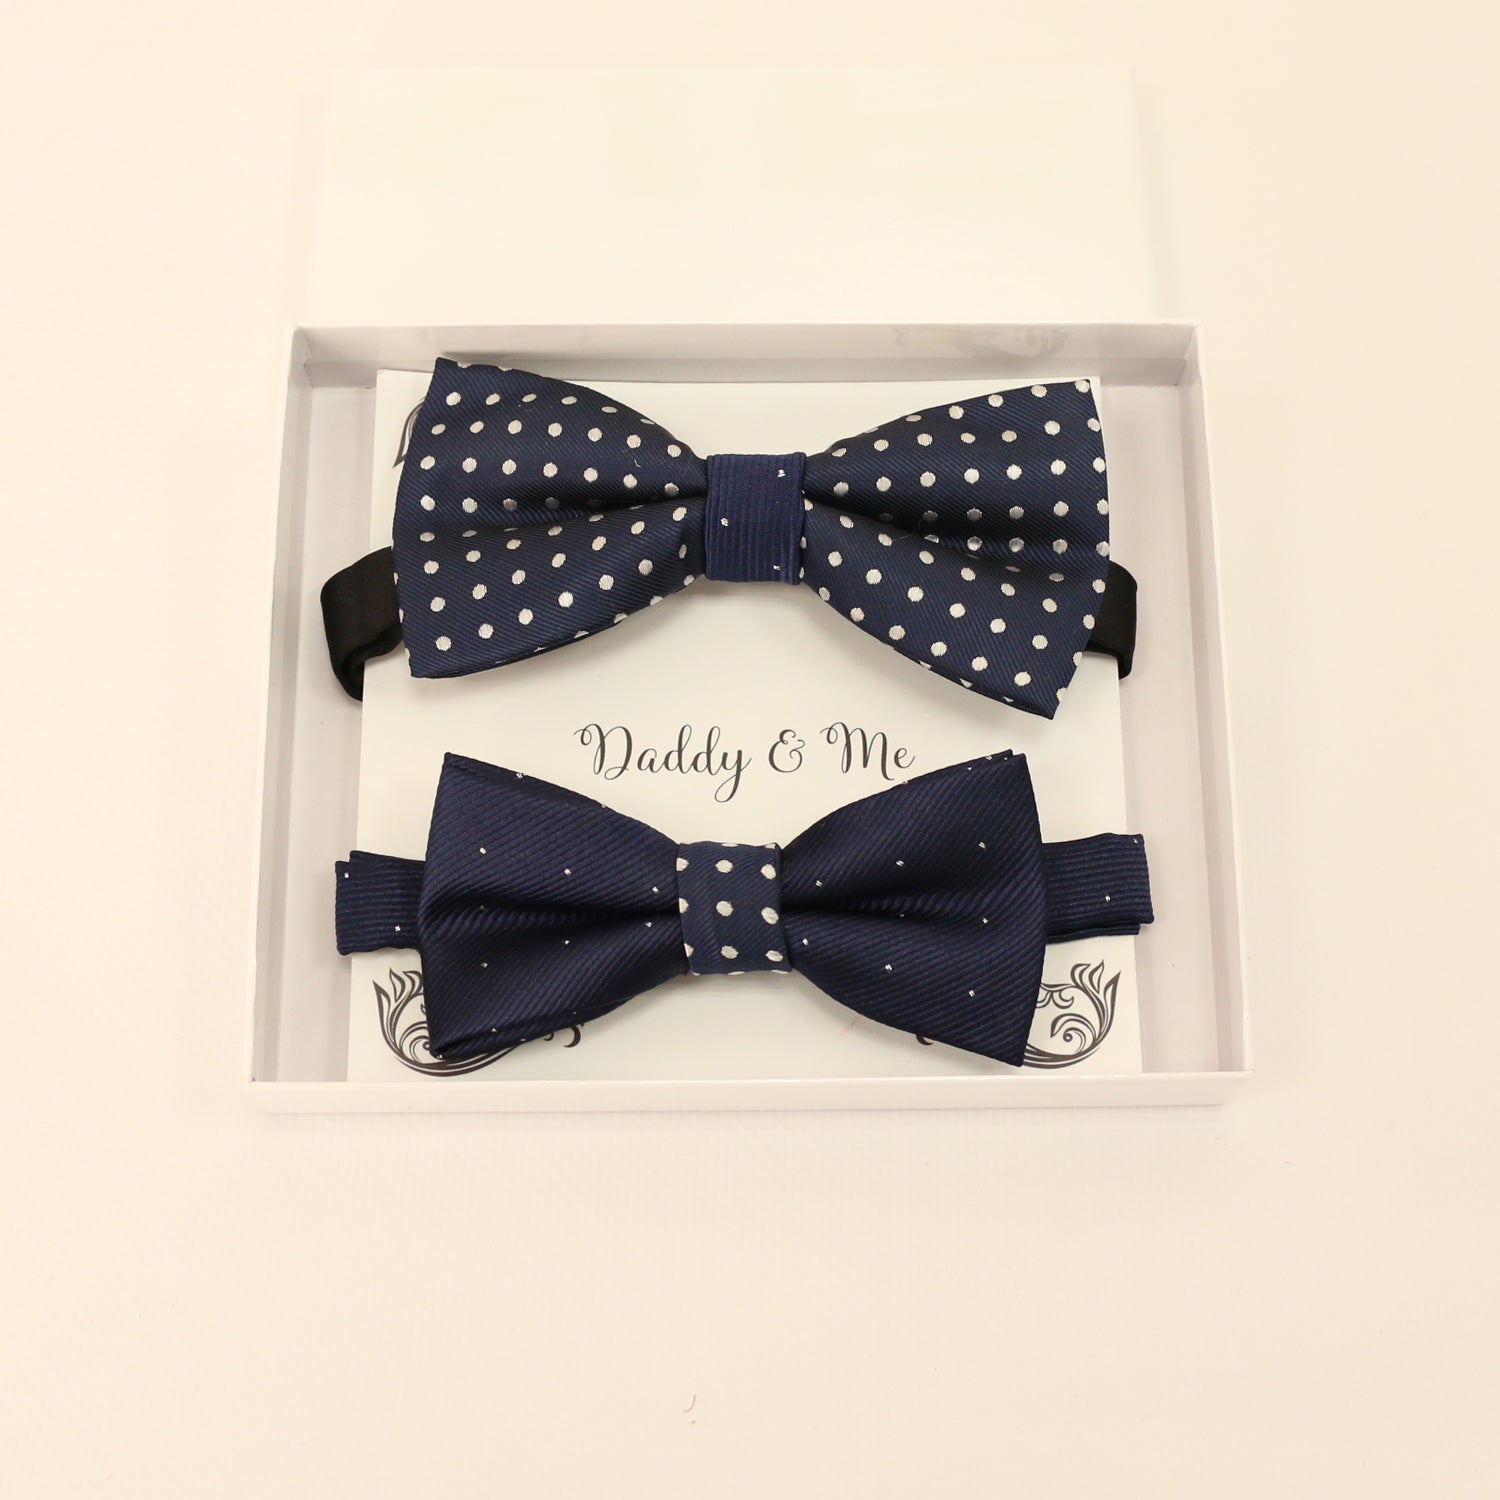 Navy polka dots bow tie set for daddy and son, Daddy and me gift set, Grandpa and me, Father son match, Navy bow tie for kids, handmade bow